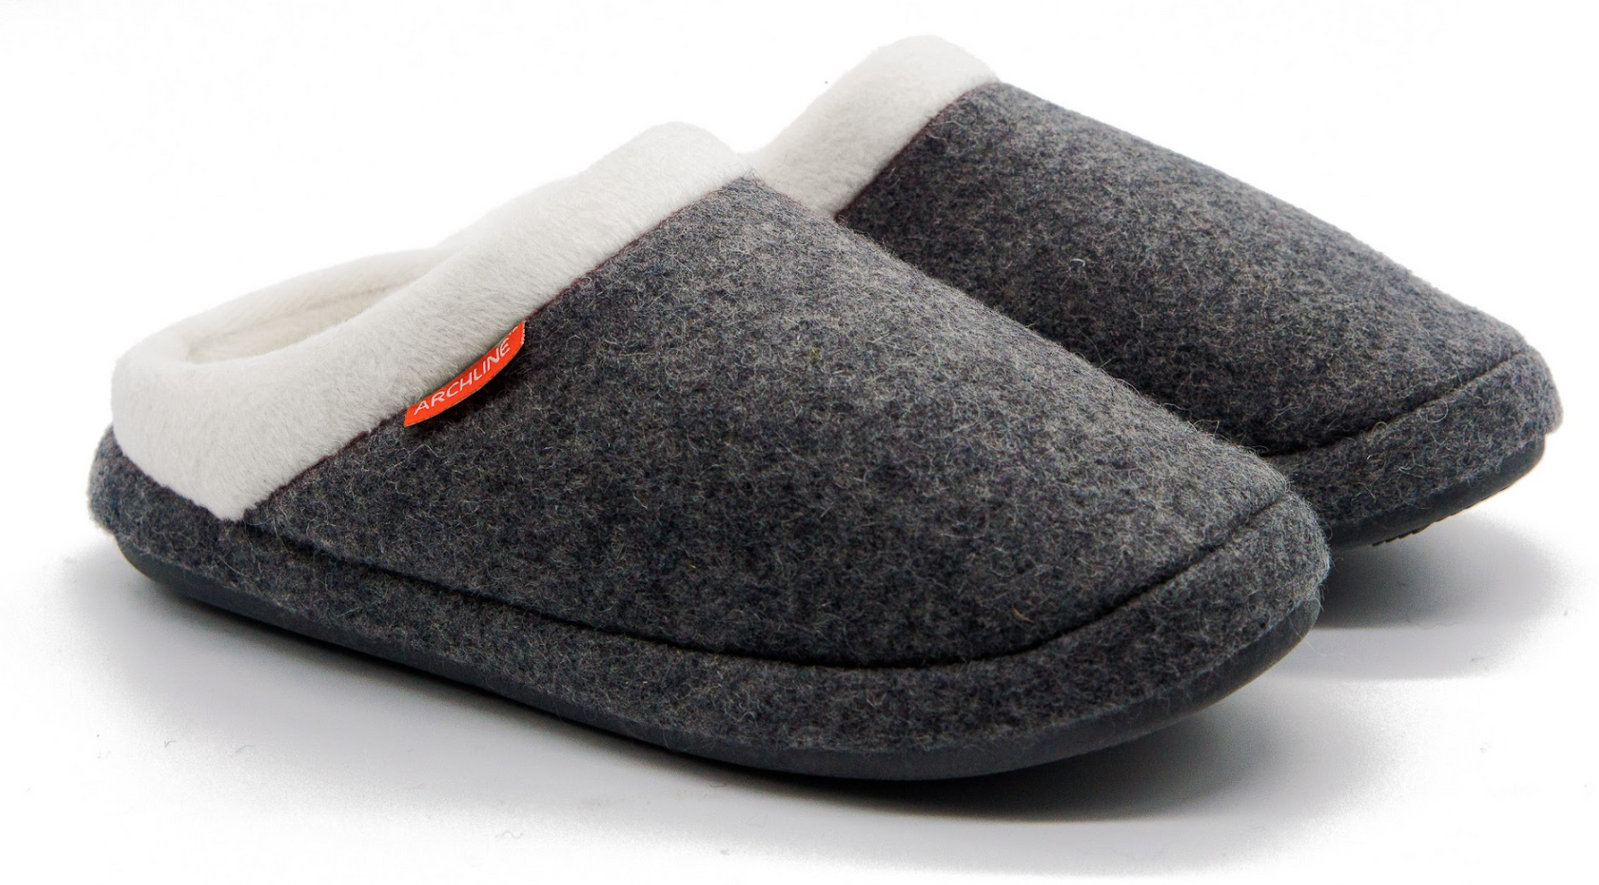 Orthotic Slippers Slip On Arch Scuffs Orthopedic Moccasins - Grey Marle - EUR 40